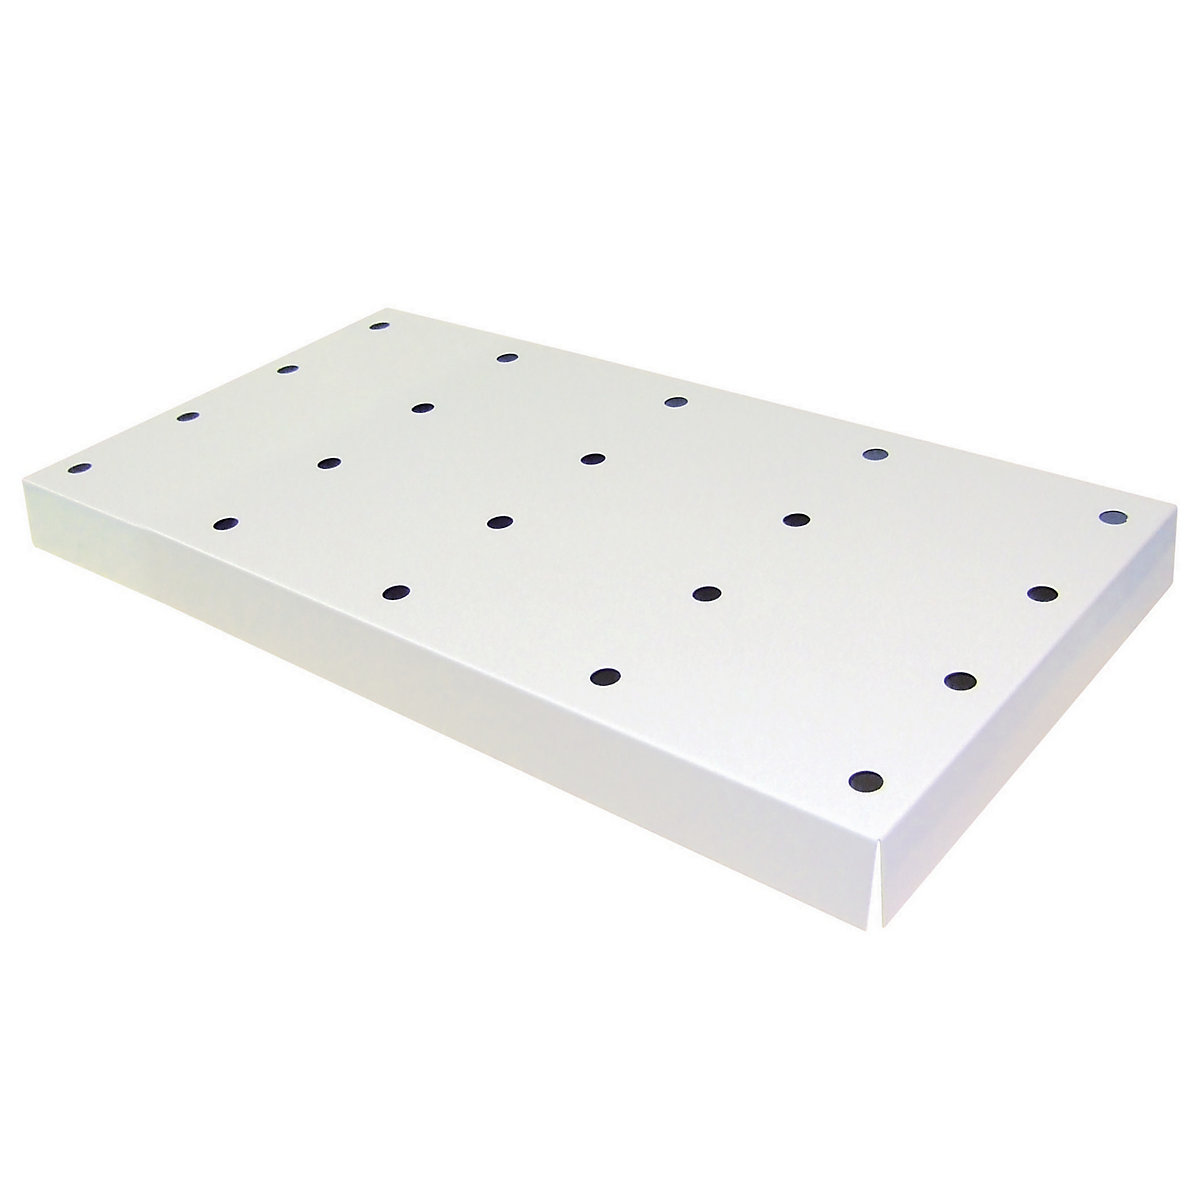 Perforated metal cover for base sump tray – asecos